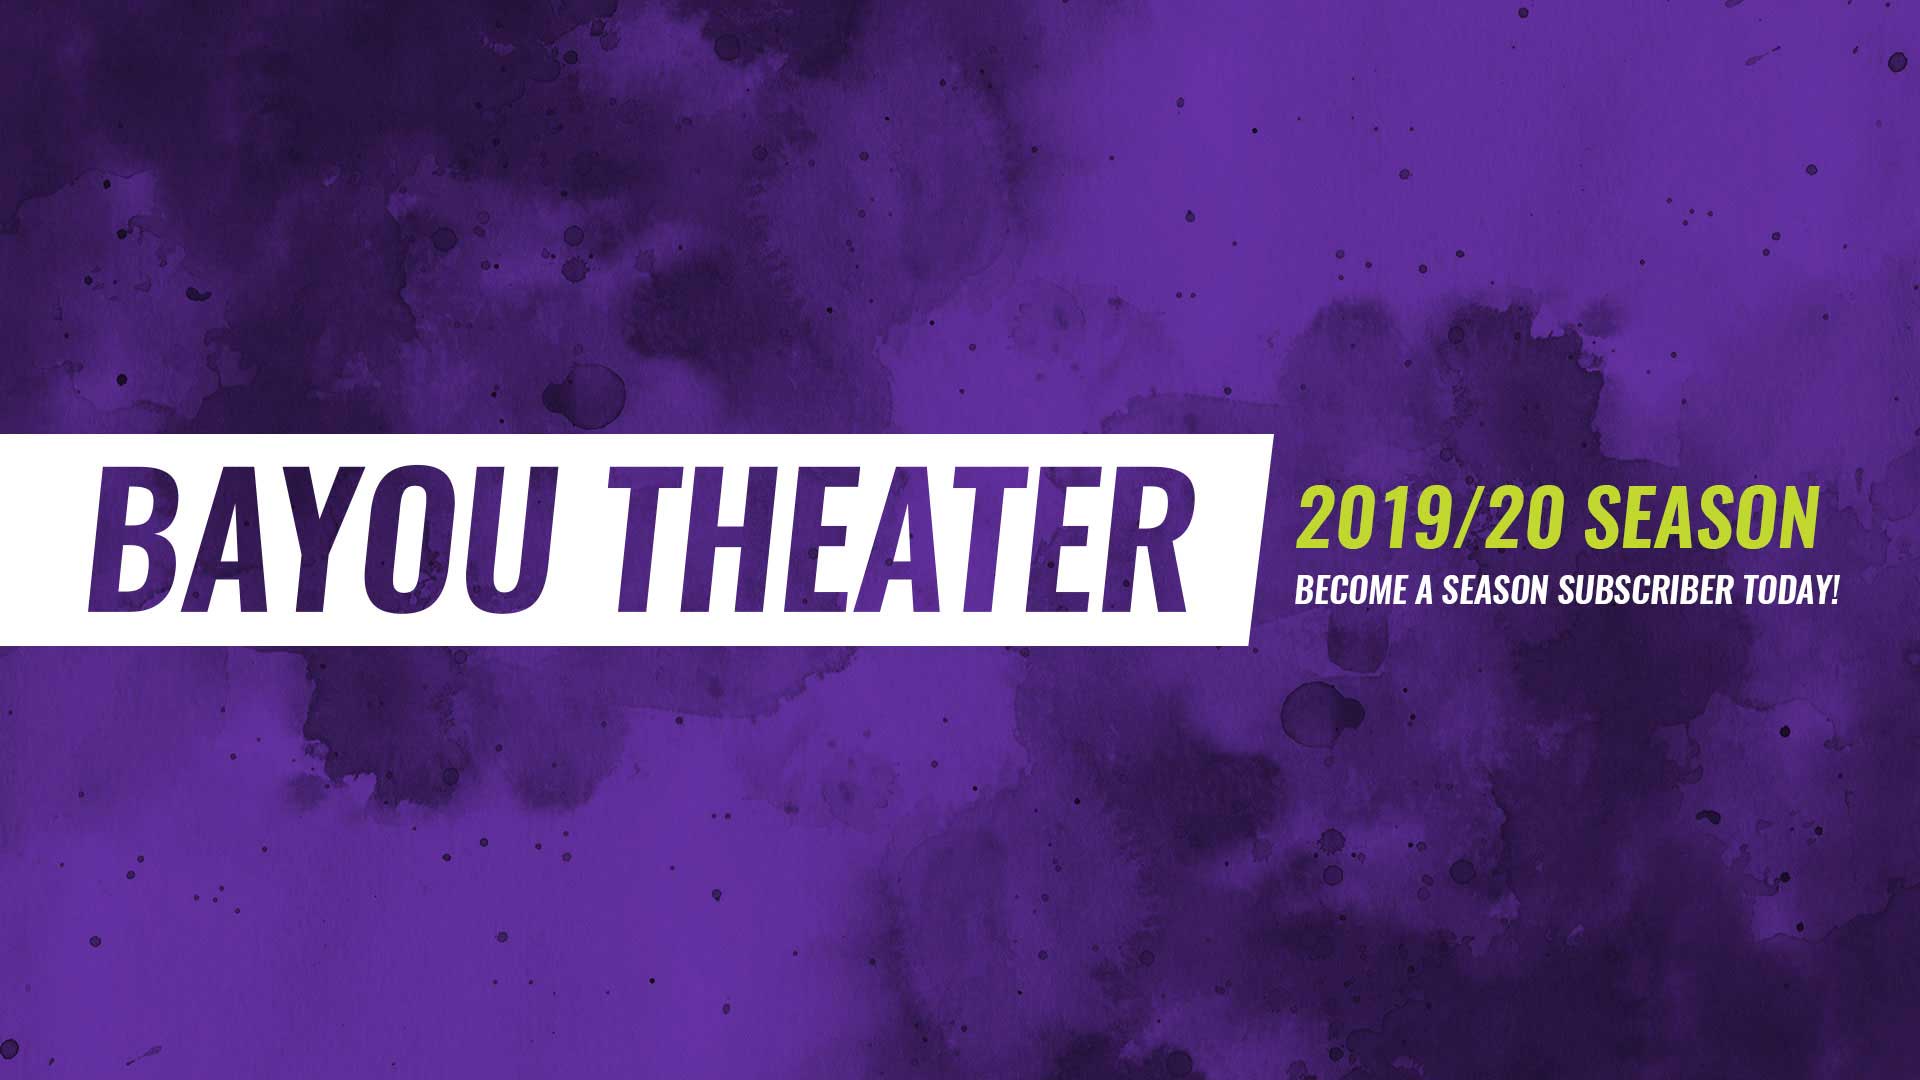 PHOTO: Promo image for the 2019-2020 season for the Bayou Theater. Photo courtesy of UHCL Bayou Theater.